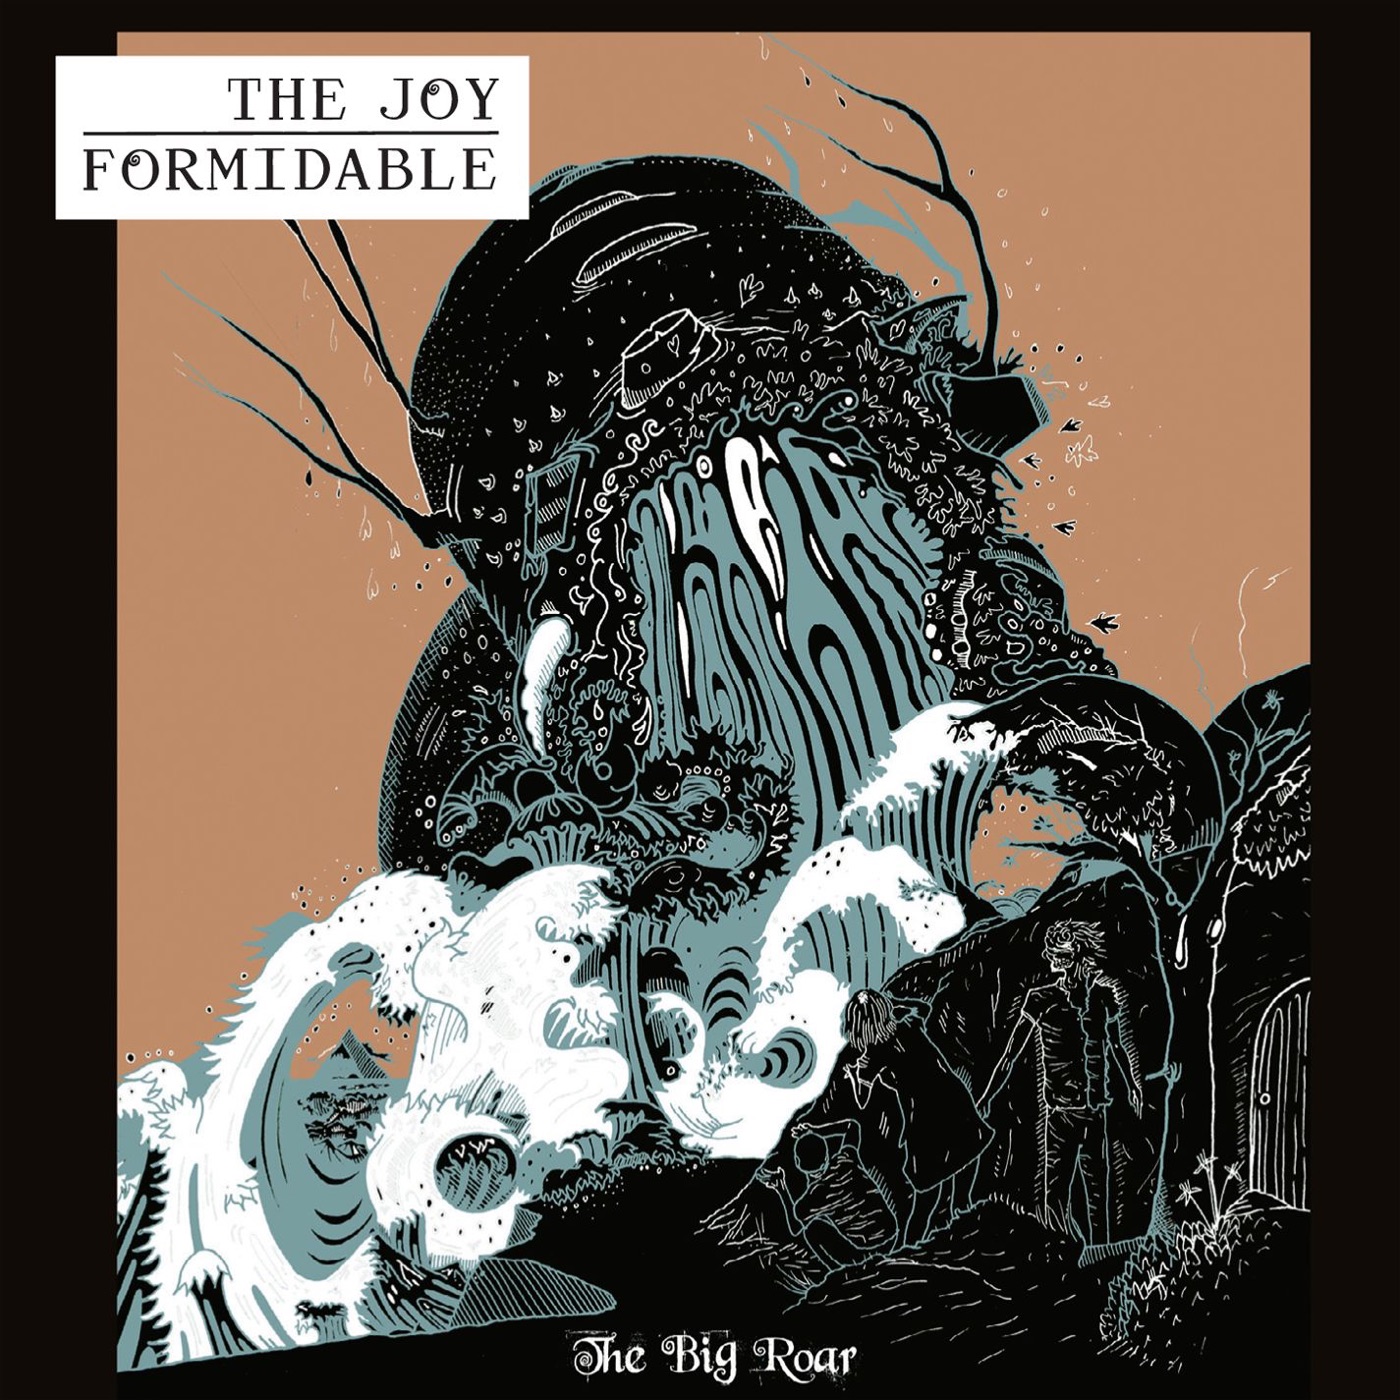 The Big Roar by The Joy Formidable